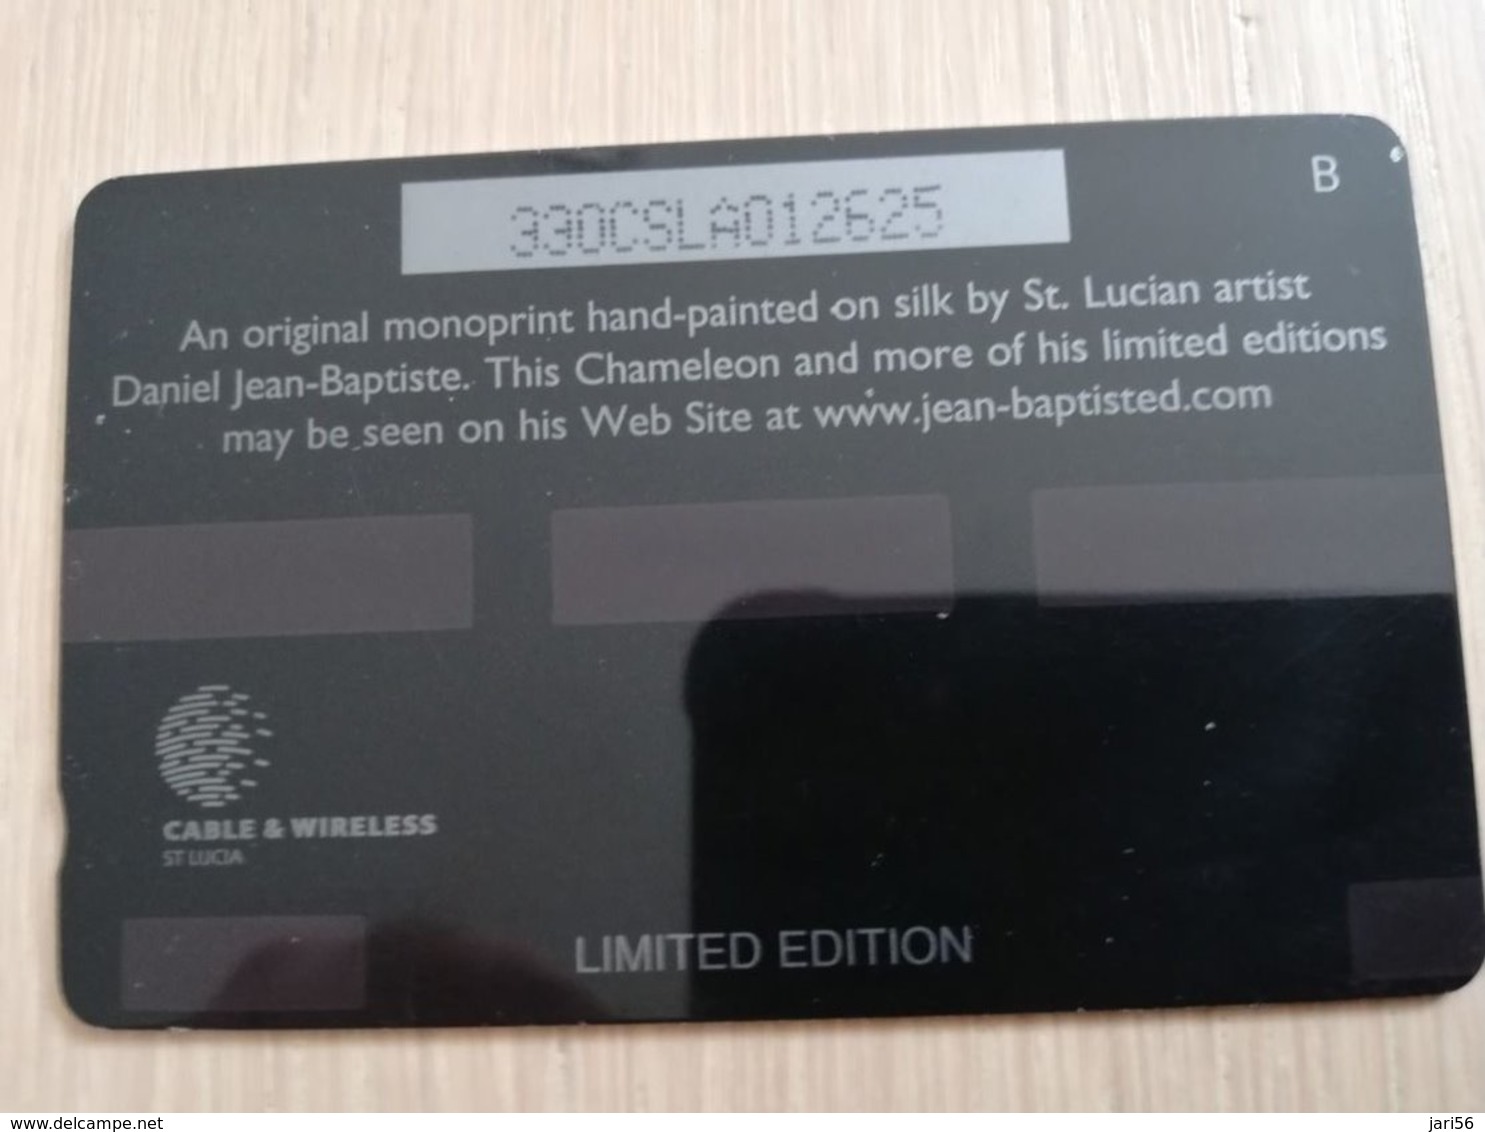 ST LUCIA    $ 40   CABLE & WIRELESS  STL-330A   330CSLA    CHAMELEON    Fine Used Card ** 2462** - Sainte Lucie